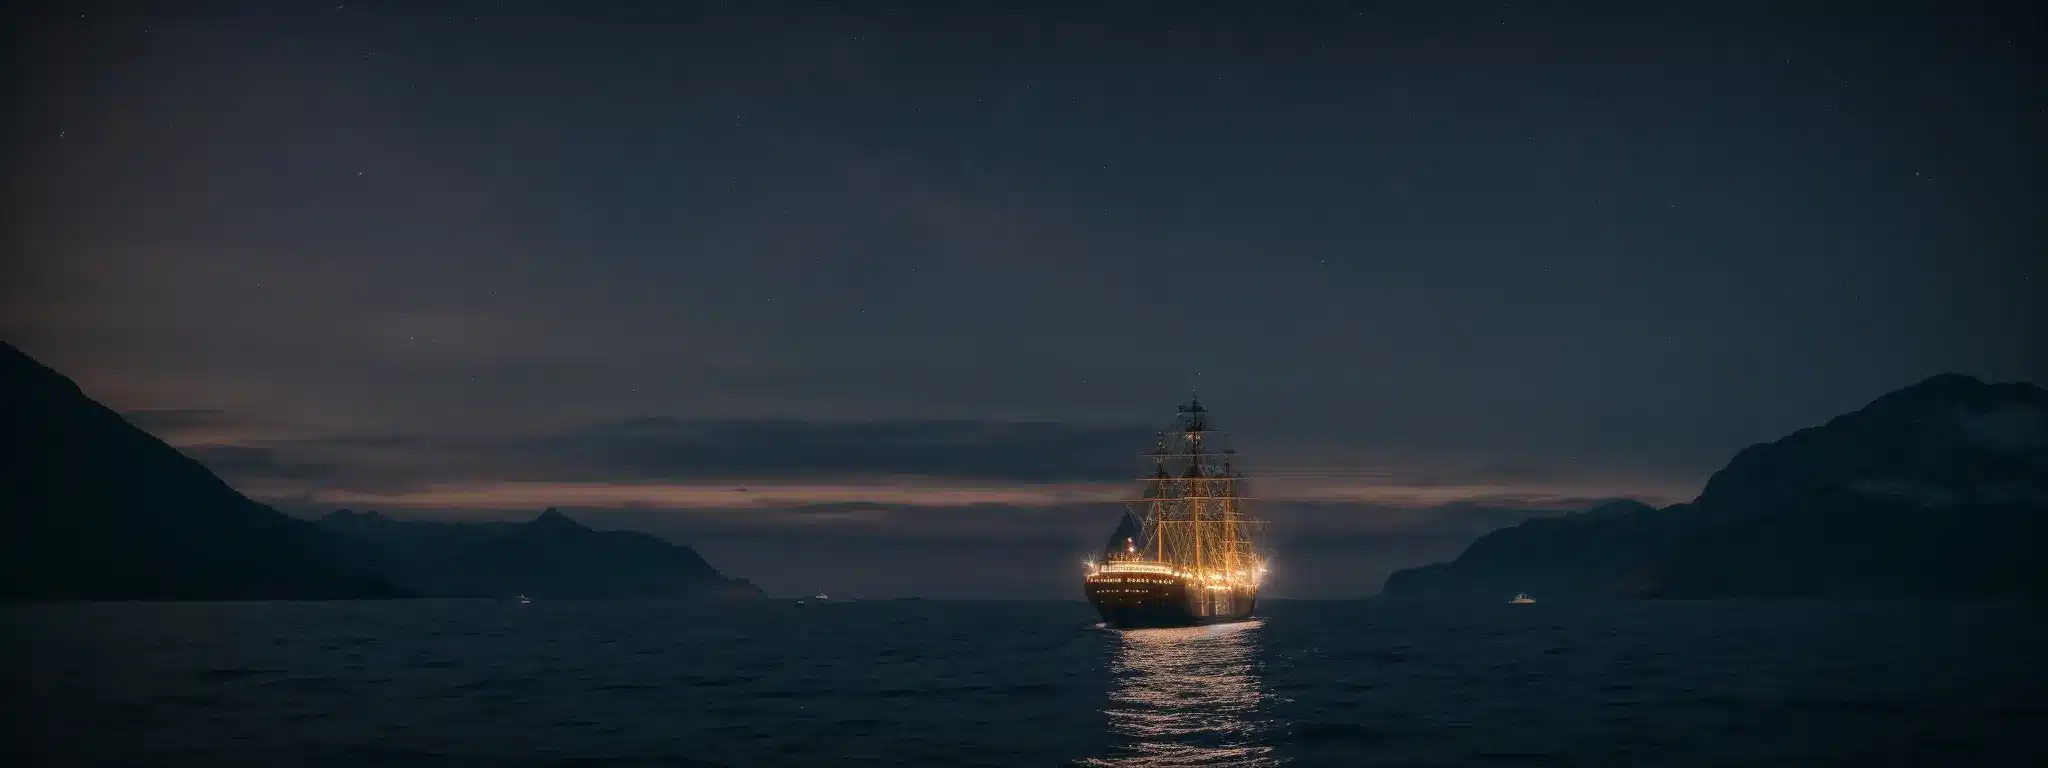 A Majestic Ship Embarks On An Ocean Voyage Under A Starlit Sky.